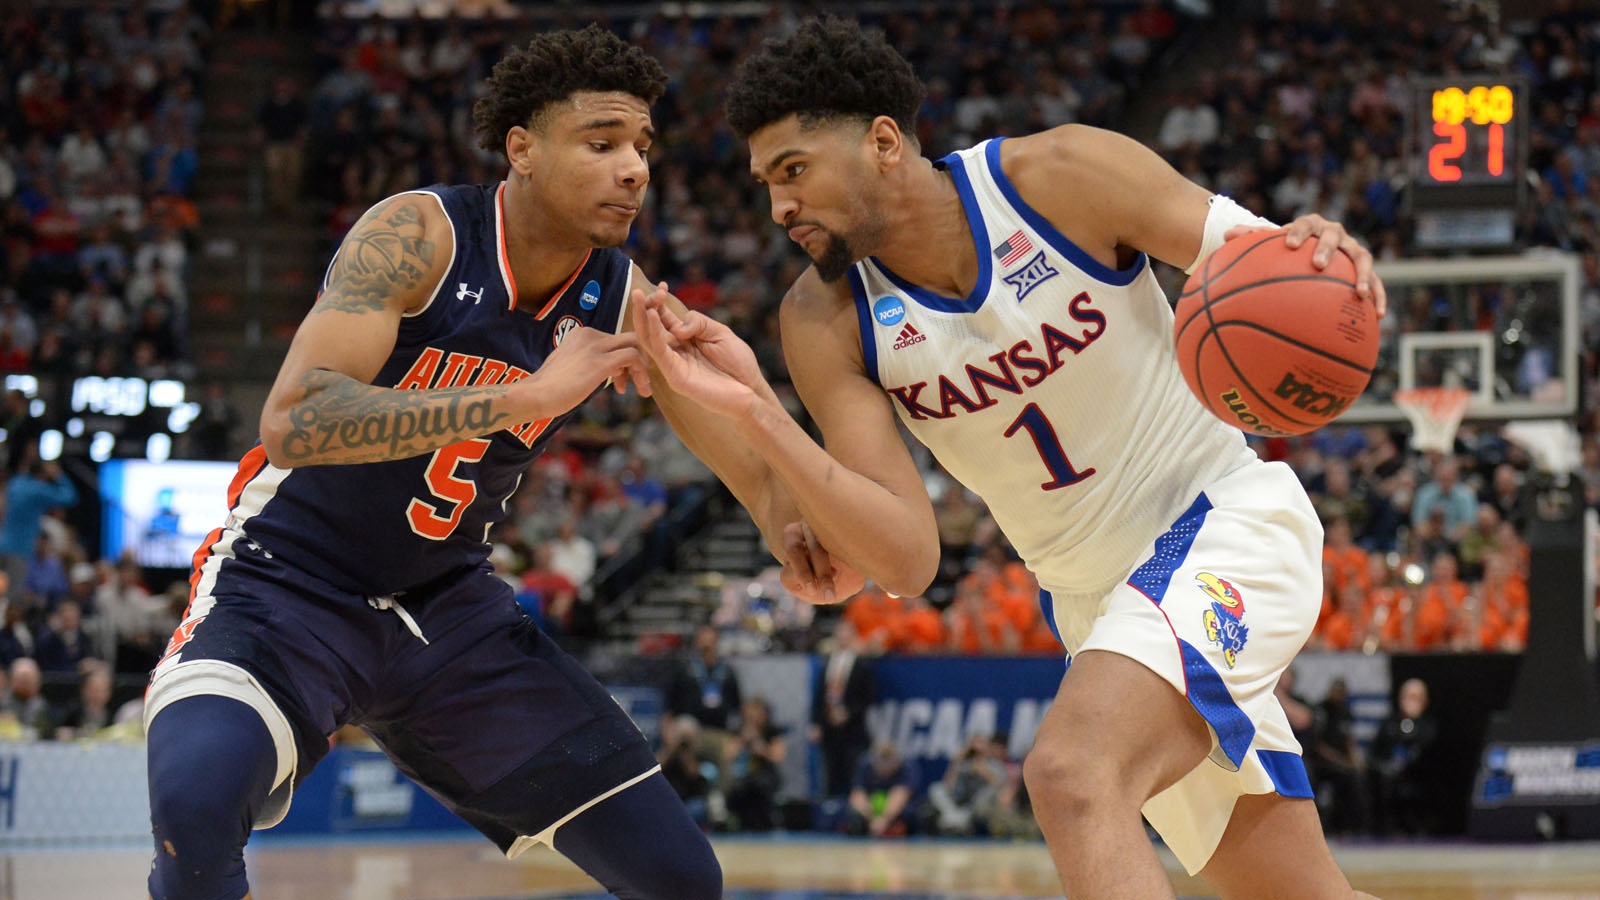 Kansas falls 89-75 to Auburn, missing Sweet 16 for first time since 2015